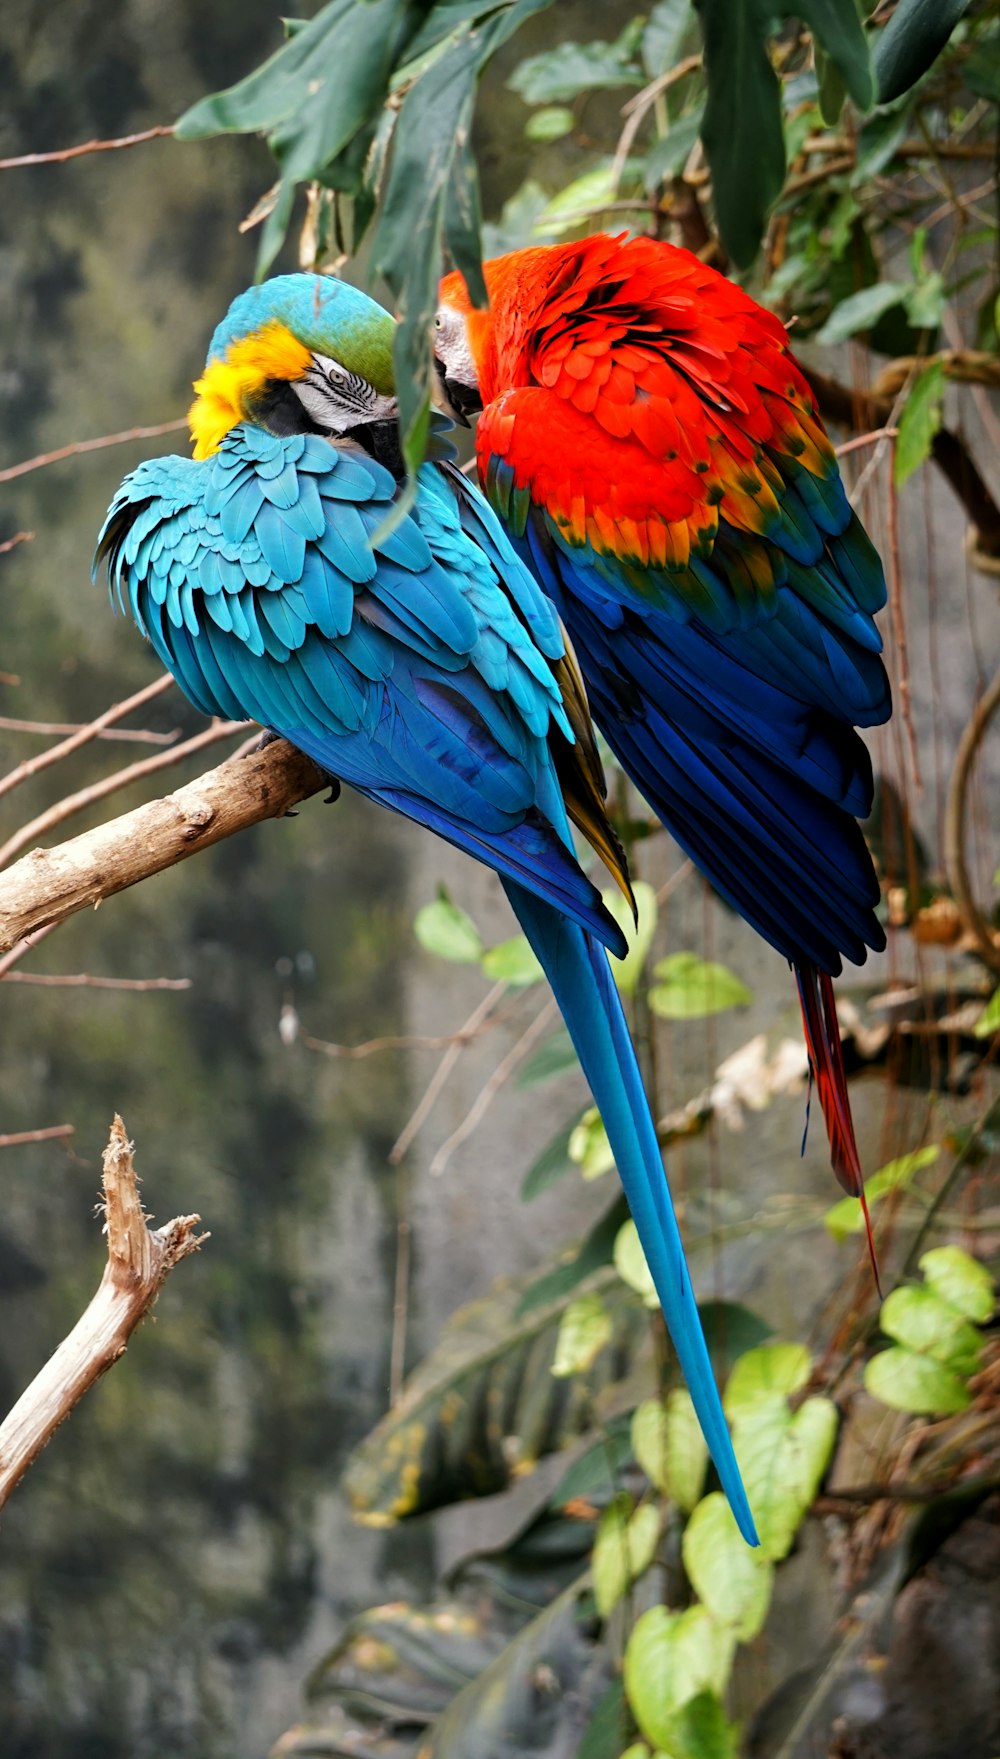 red and blue parrots sitting on branch